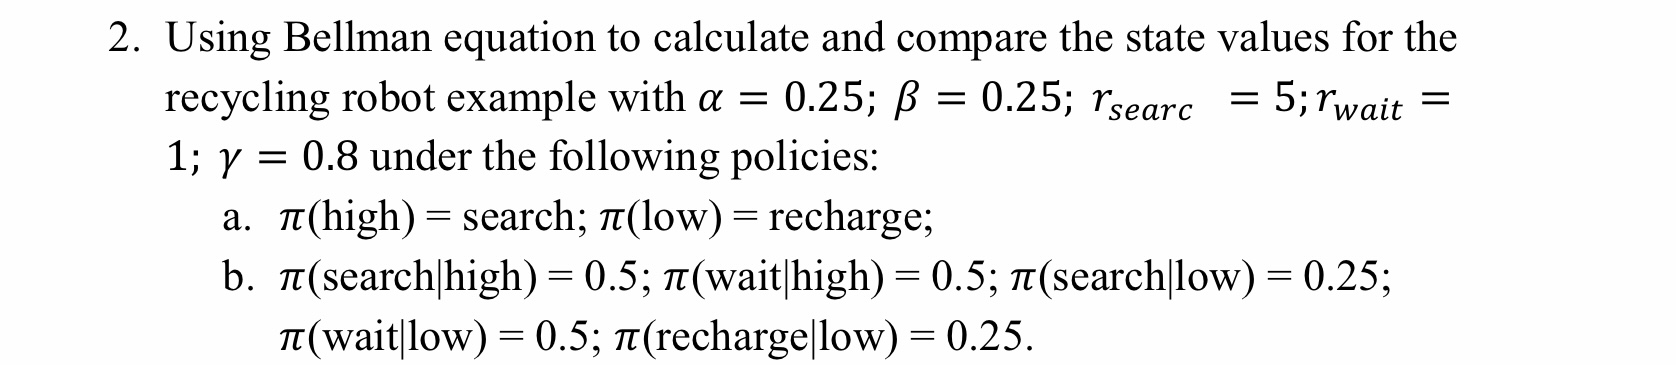 2. Using Bellman equation to calculate and compare the state values for the recycling robot example with a =